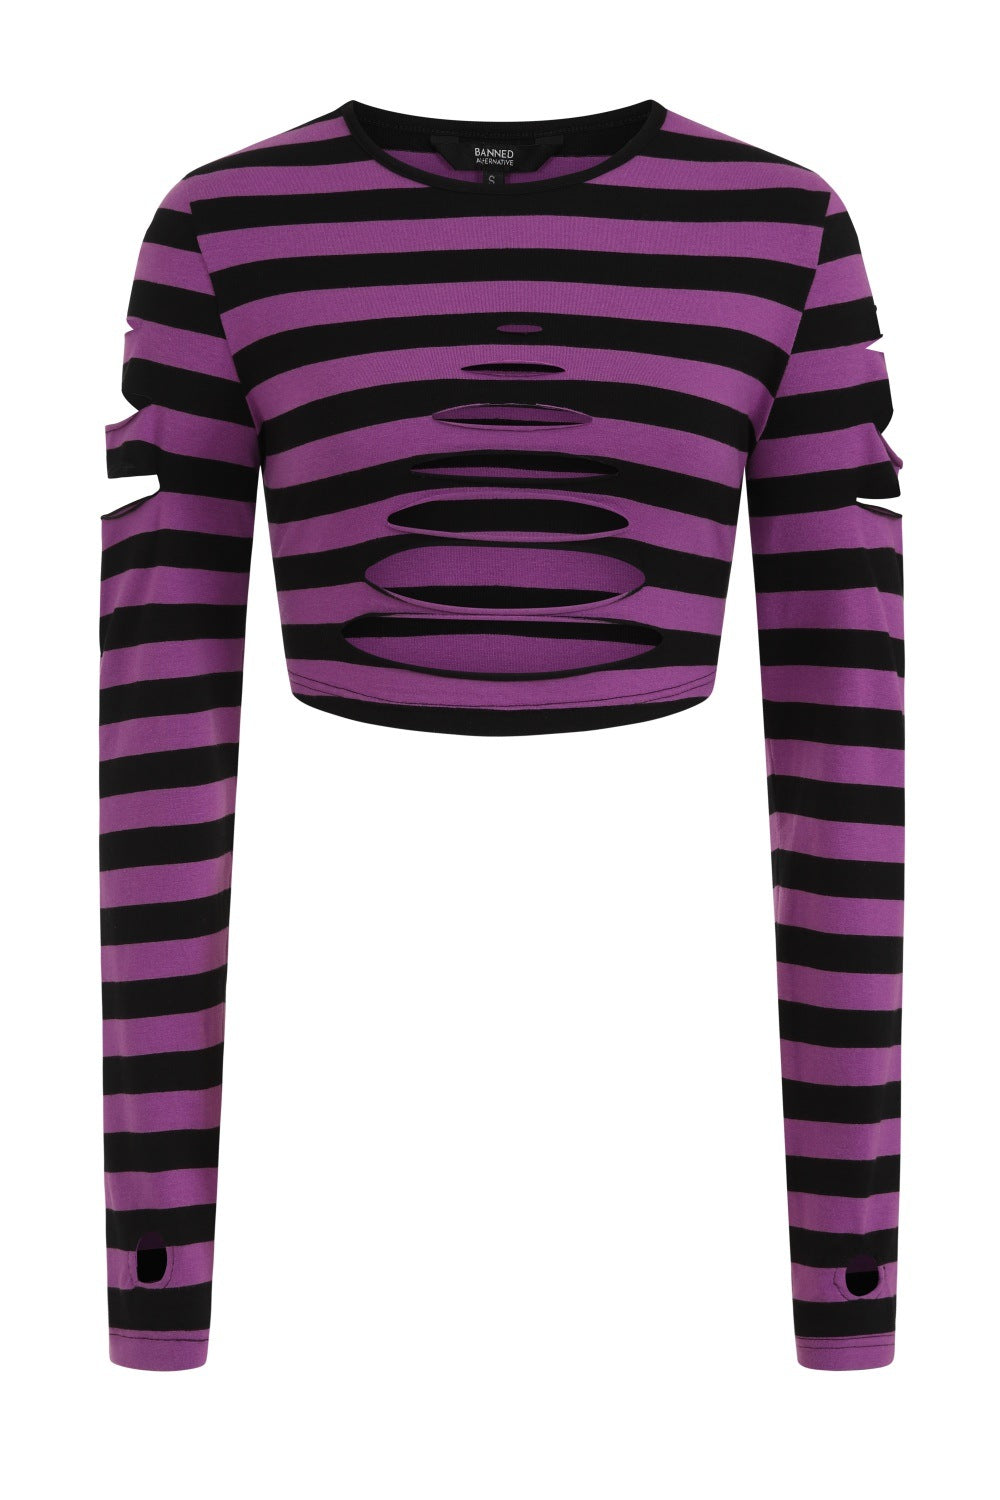 Purple and black stripe crop top with rip designs, long sleeves and thumb holes